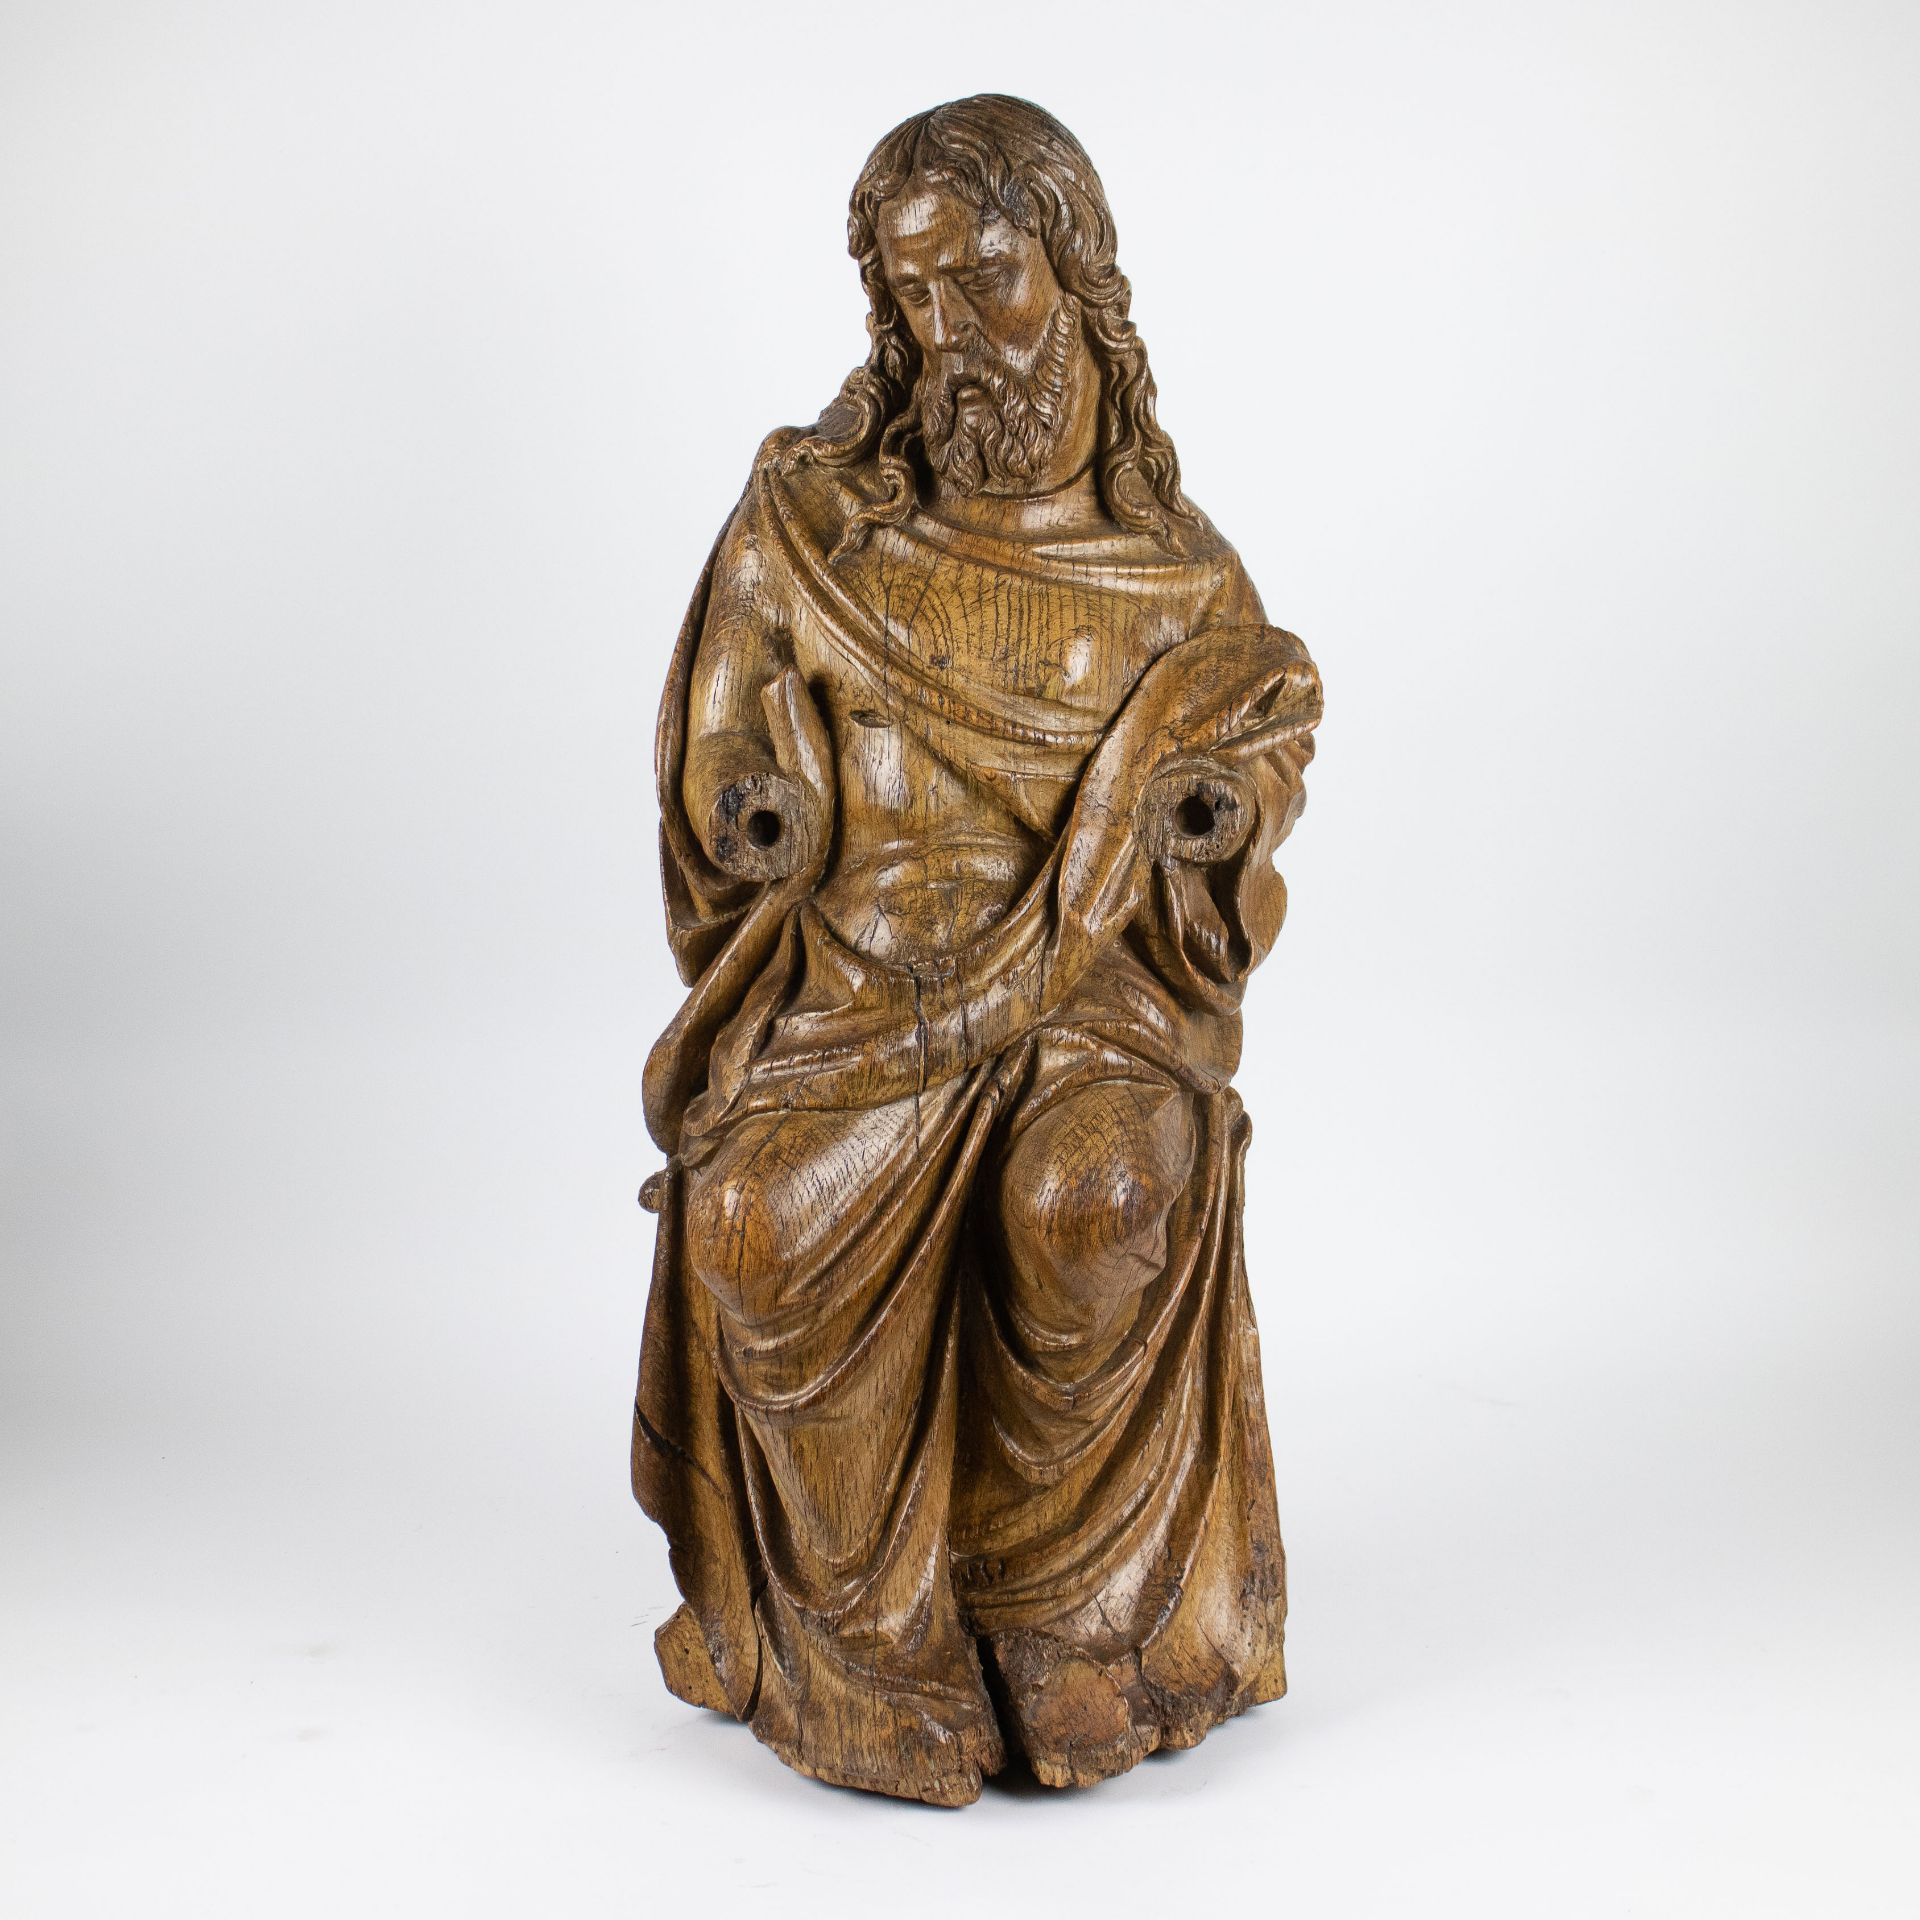 Wooden oak carved Holy figure 16th century